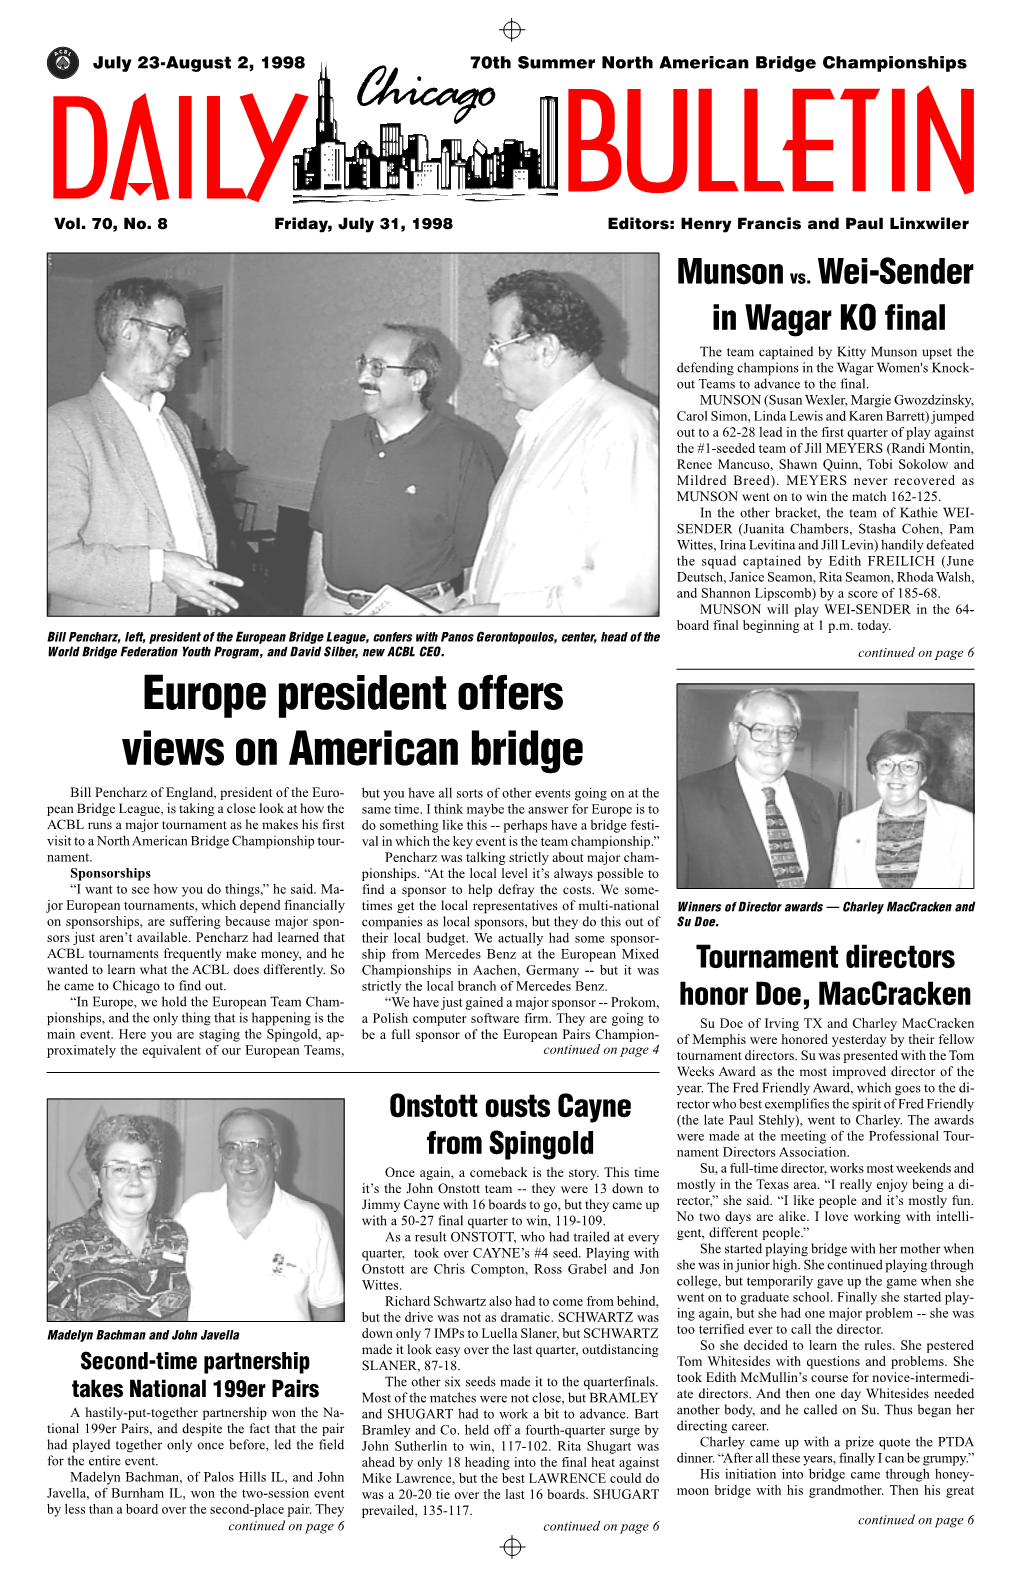 Chicago Daily Bulletin 8